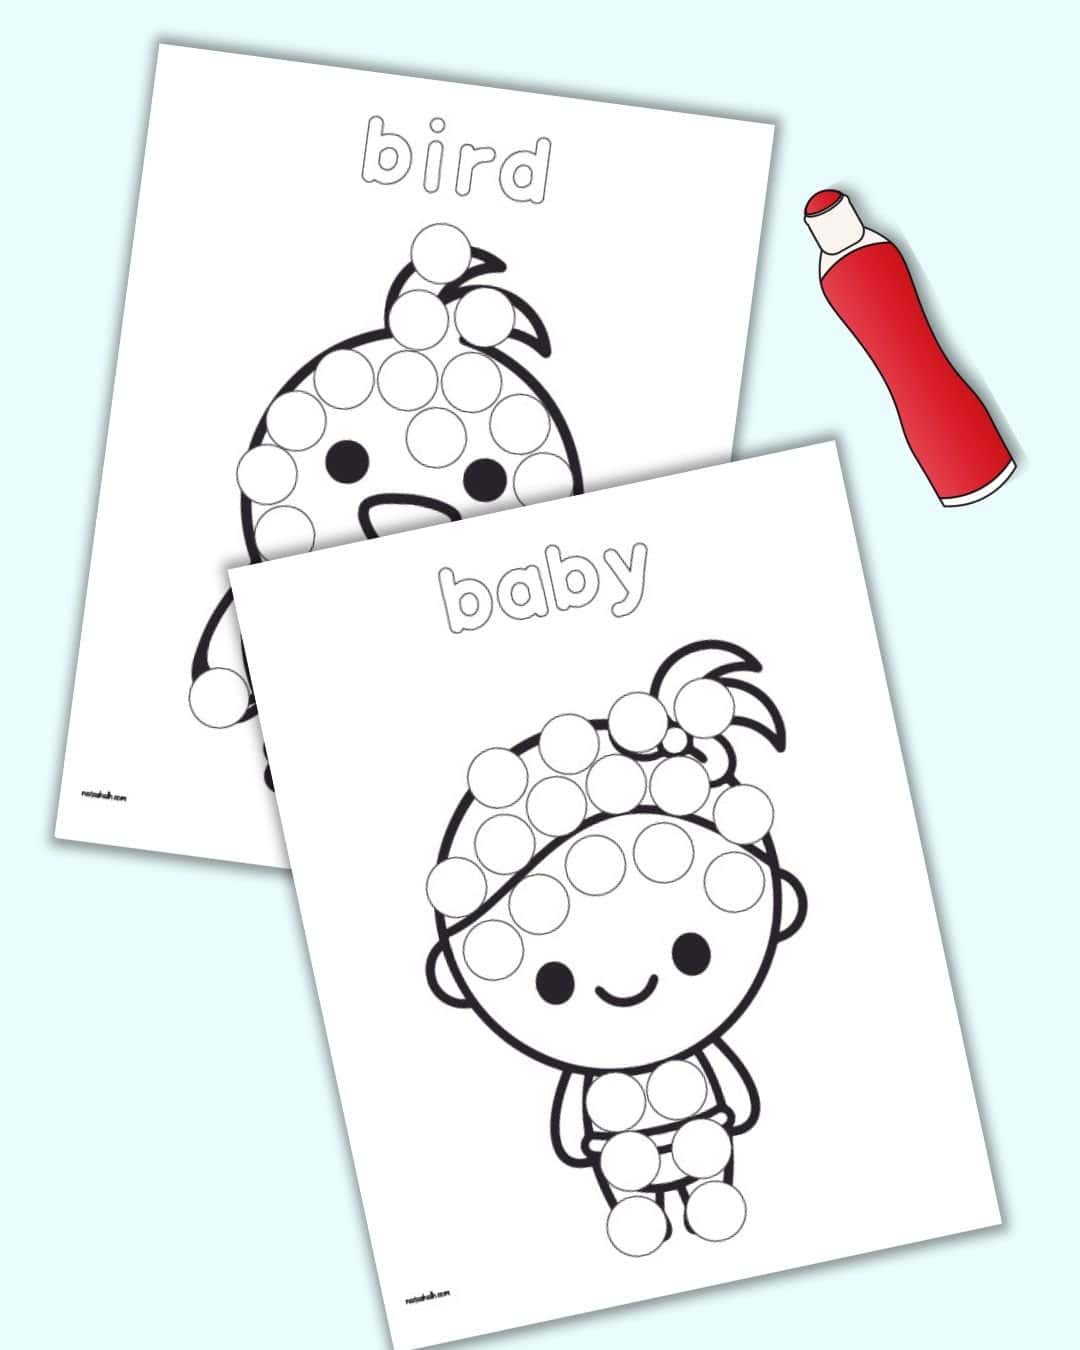 A preview of two dot marker coloring pages. One has a baby and the other has a bird.